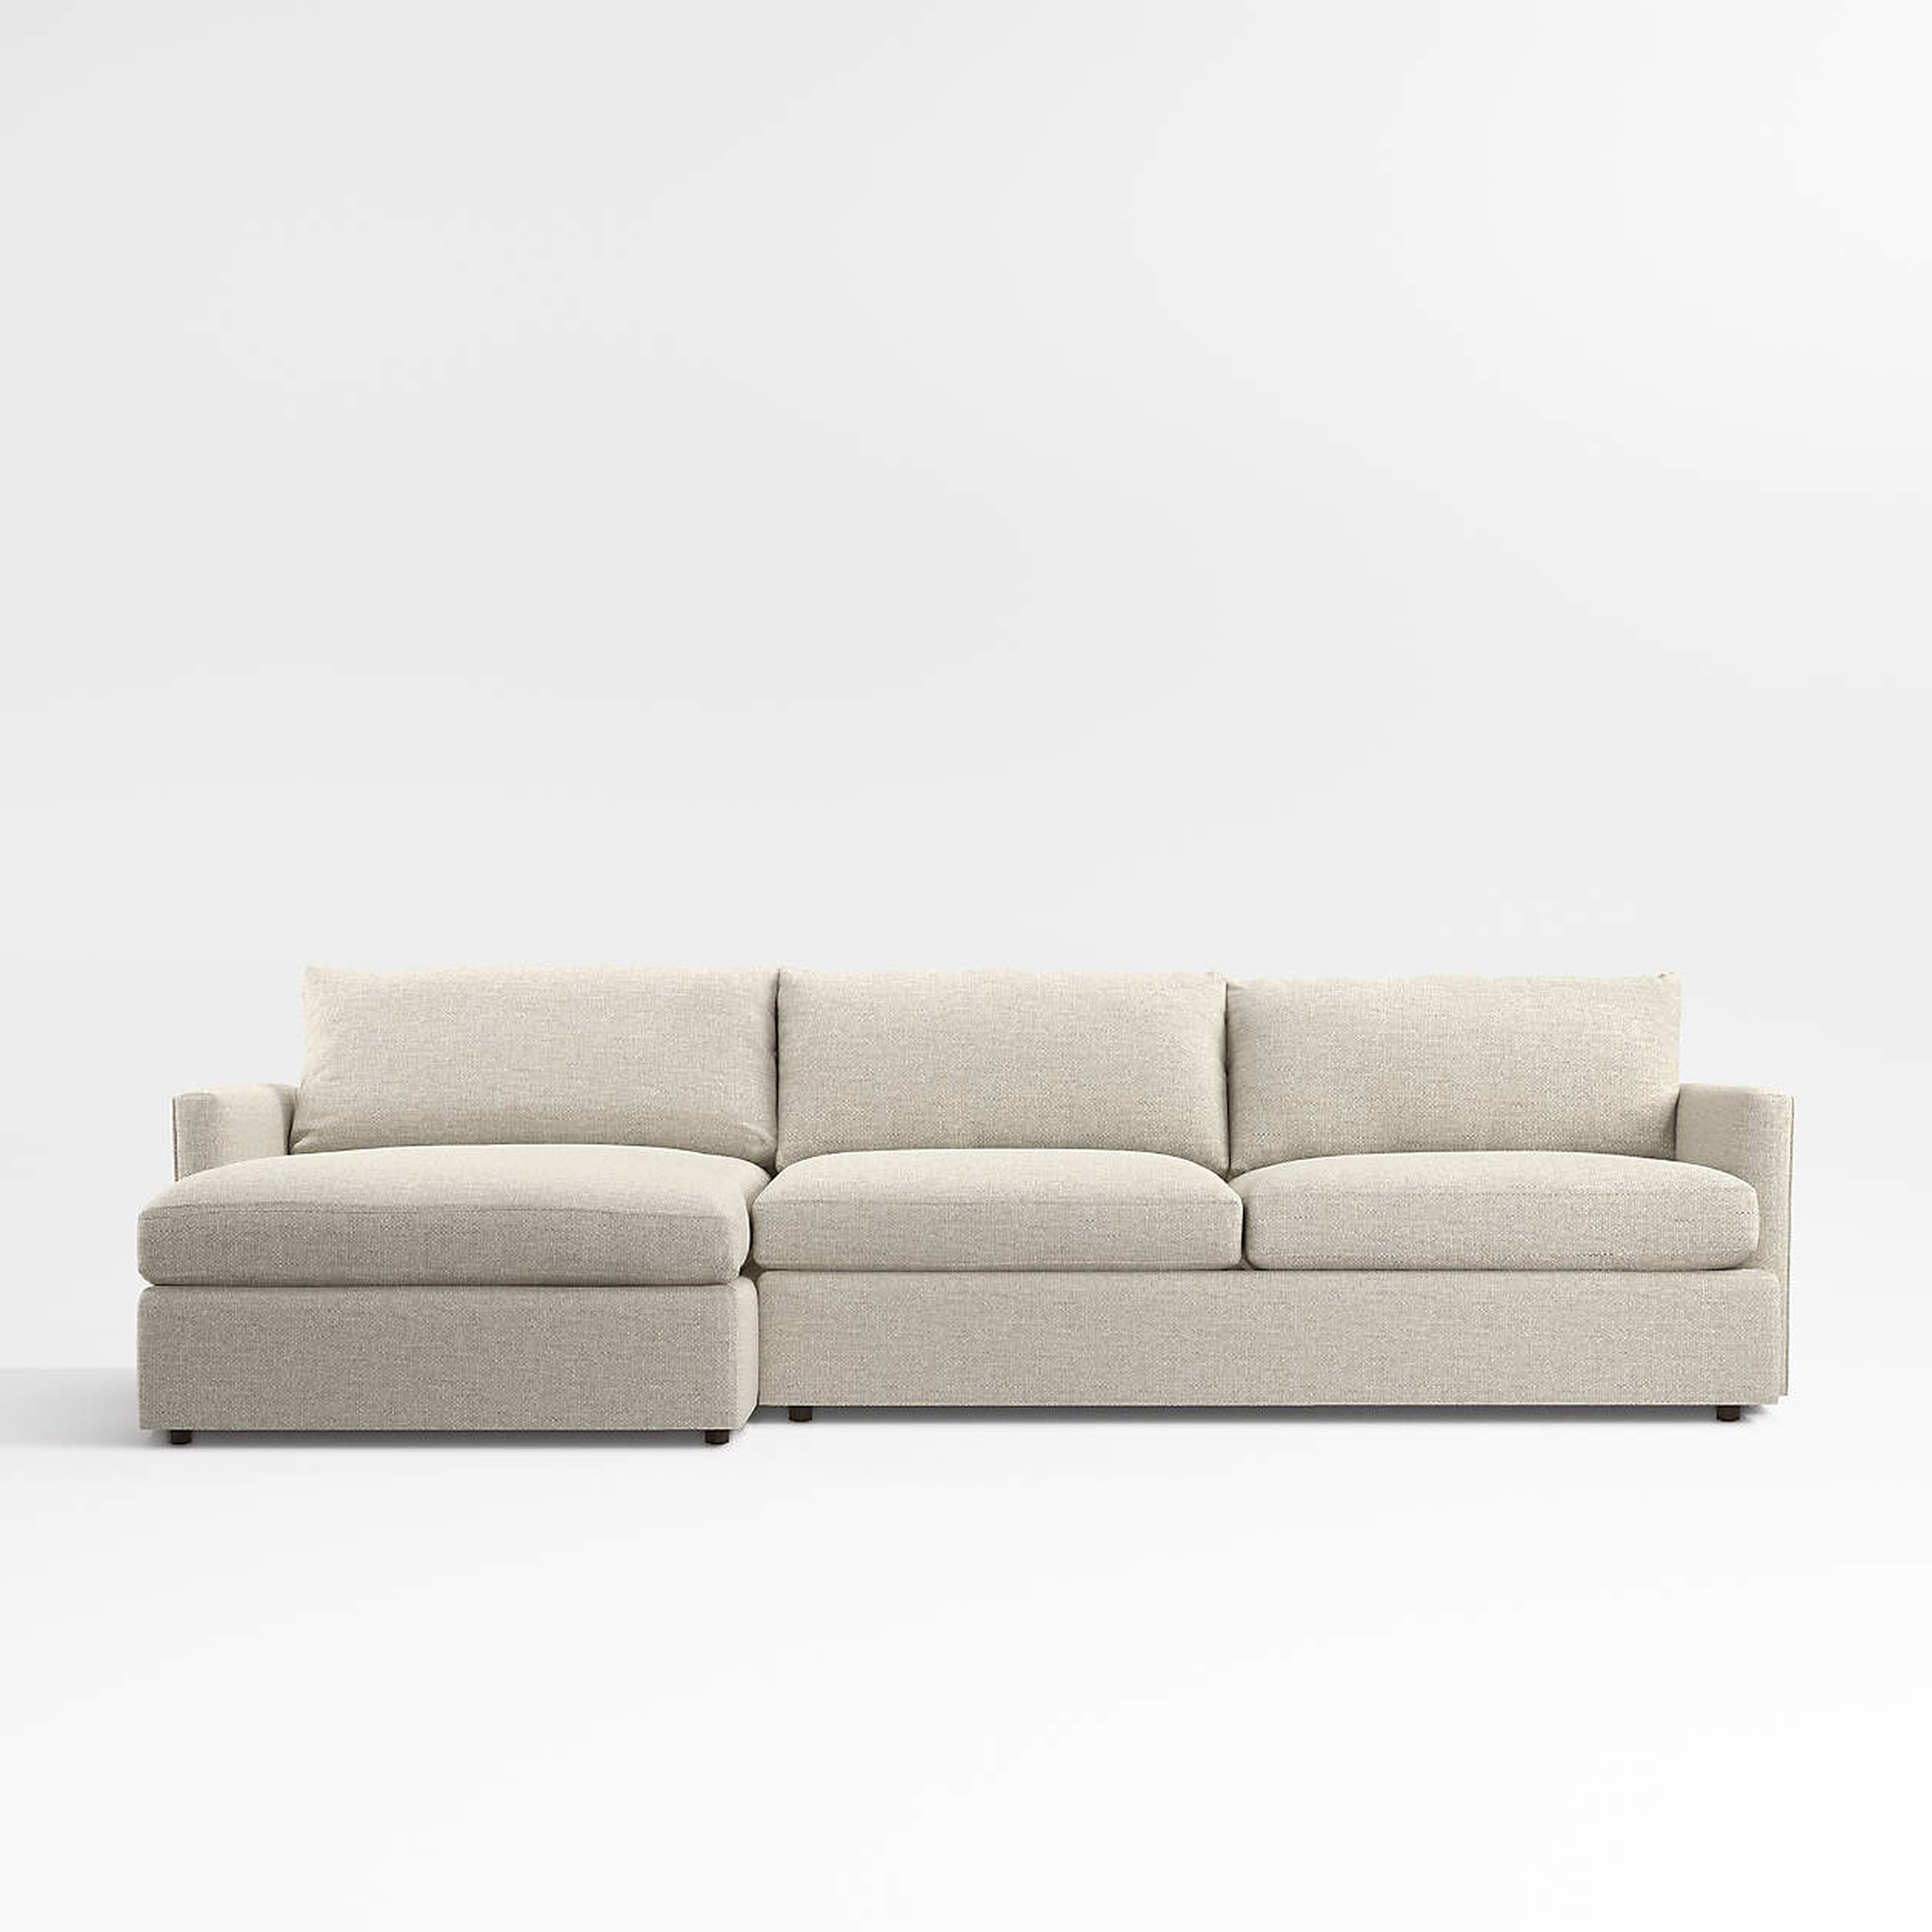 Lounge 2-Piece Sectional Sofa - Crate and Barrel